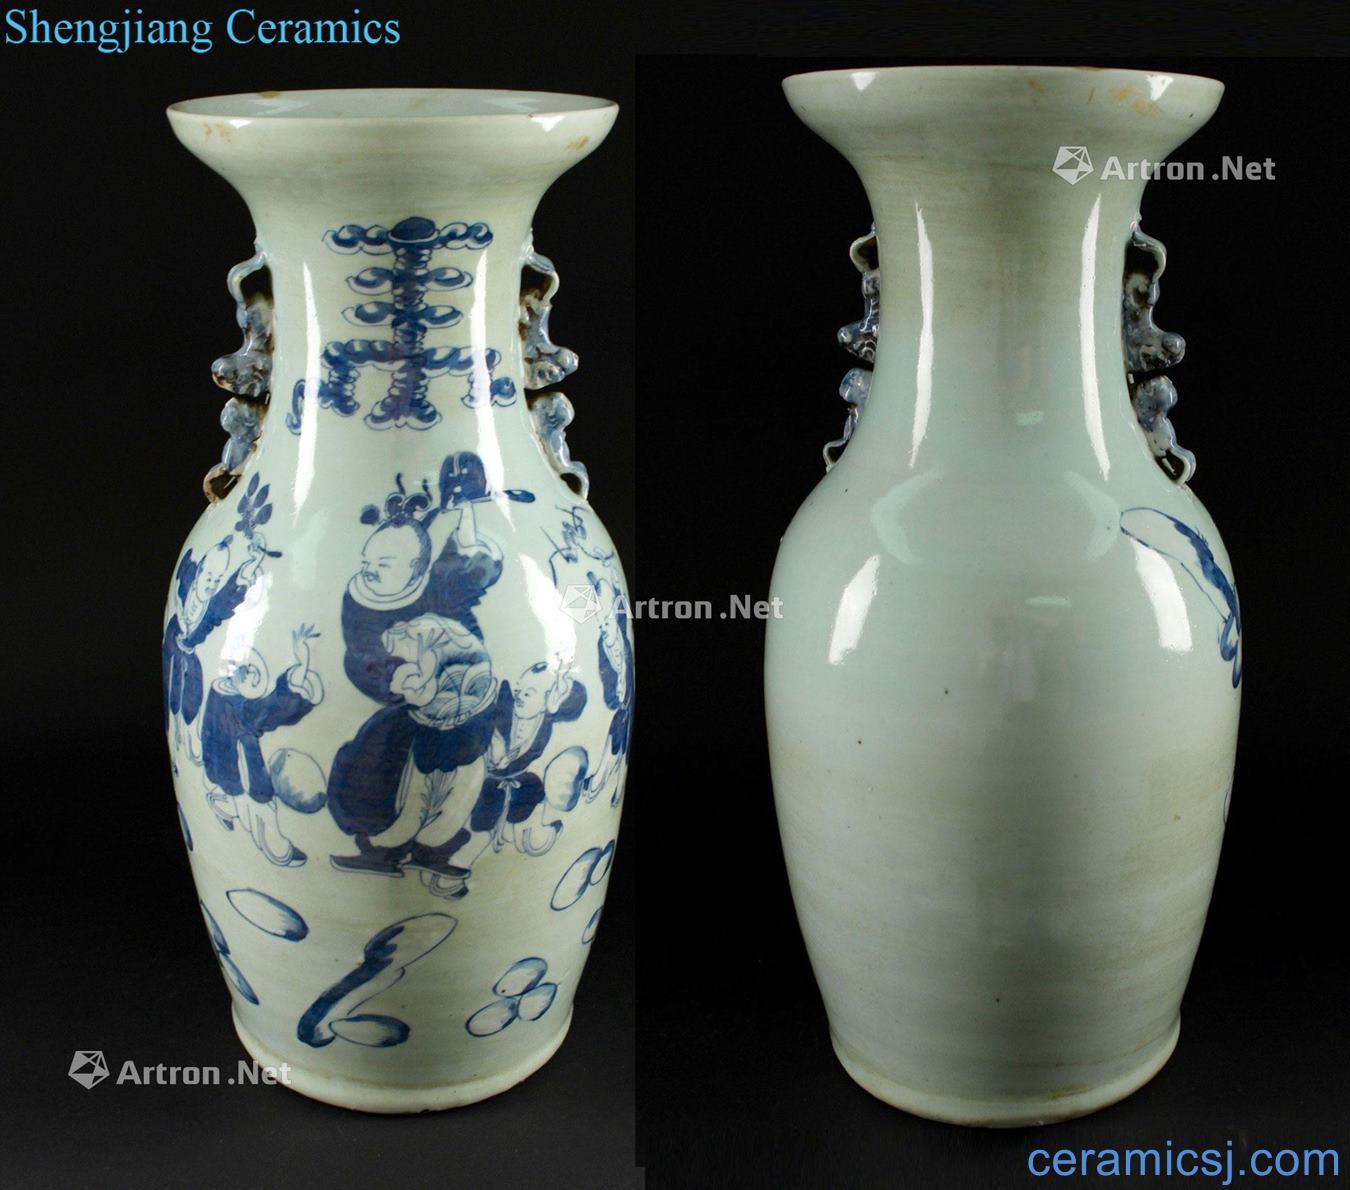 Qing guangxu Pea green glaze porcelain vase with a lion baby play